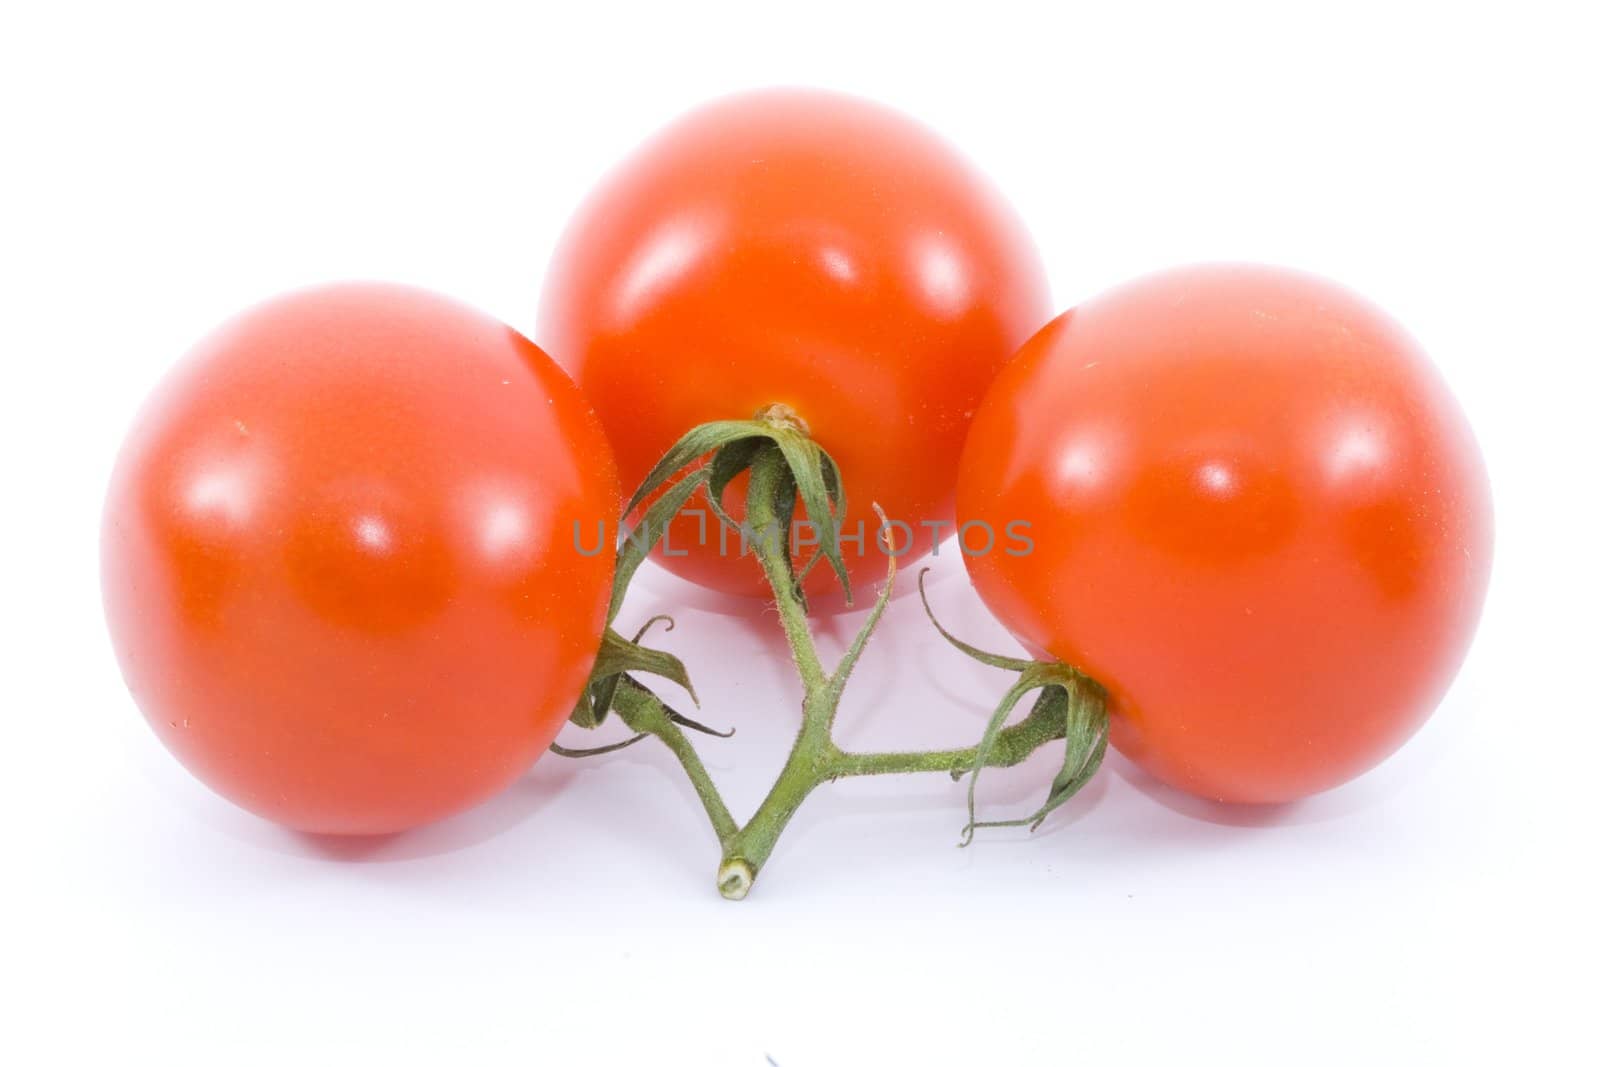 tomatoes - healthy eating - vegetables - close up